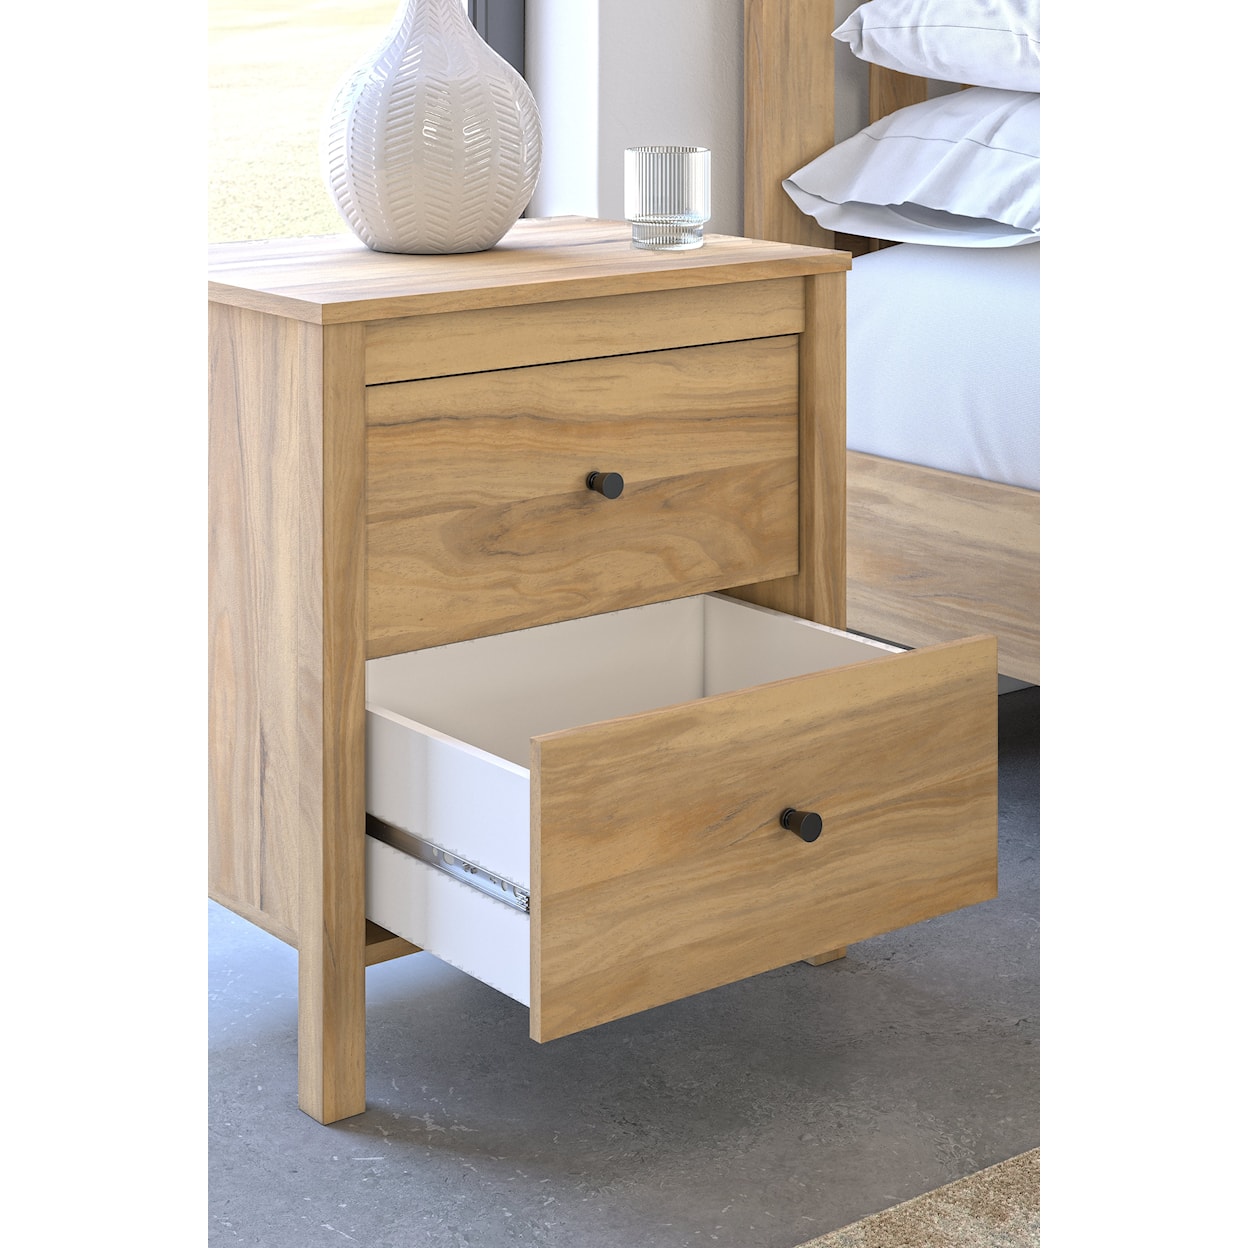 Signature Design by Ashley Bermacy 2-Drawer Nightstand